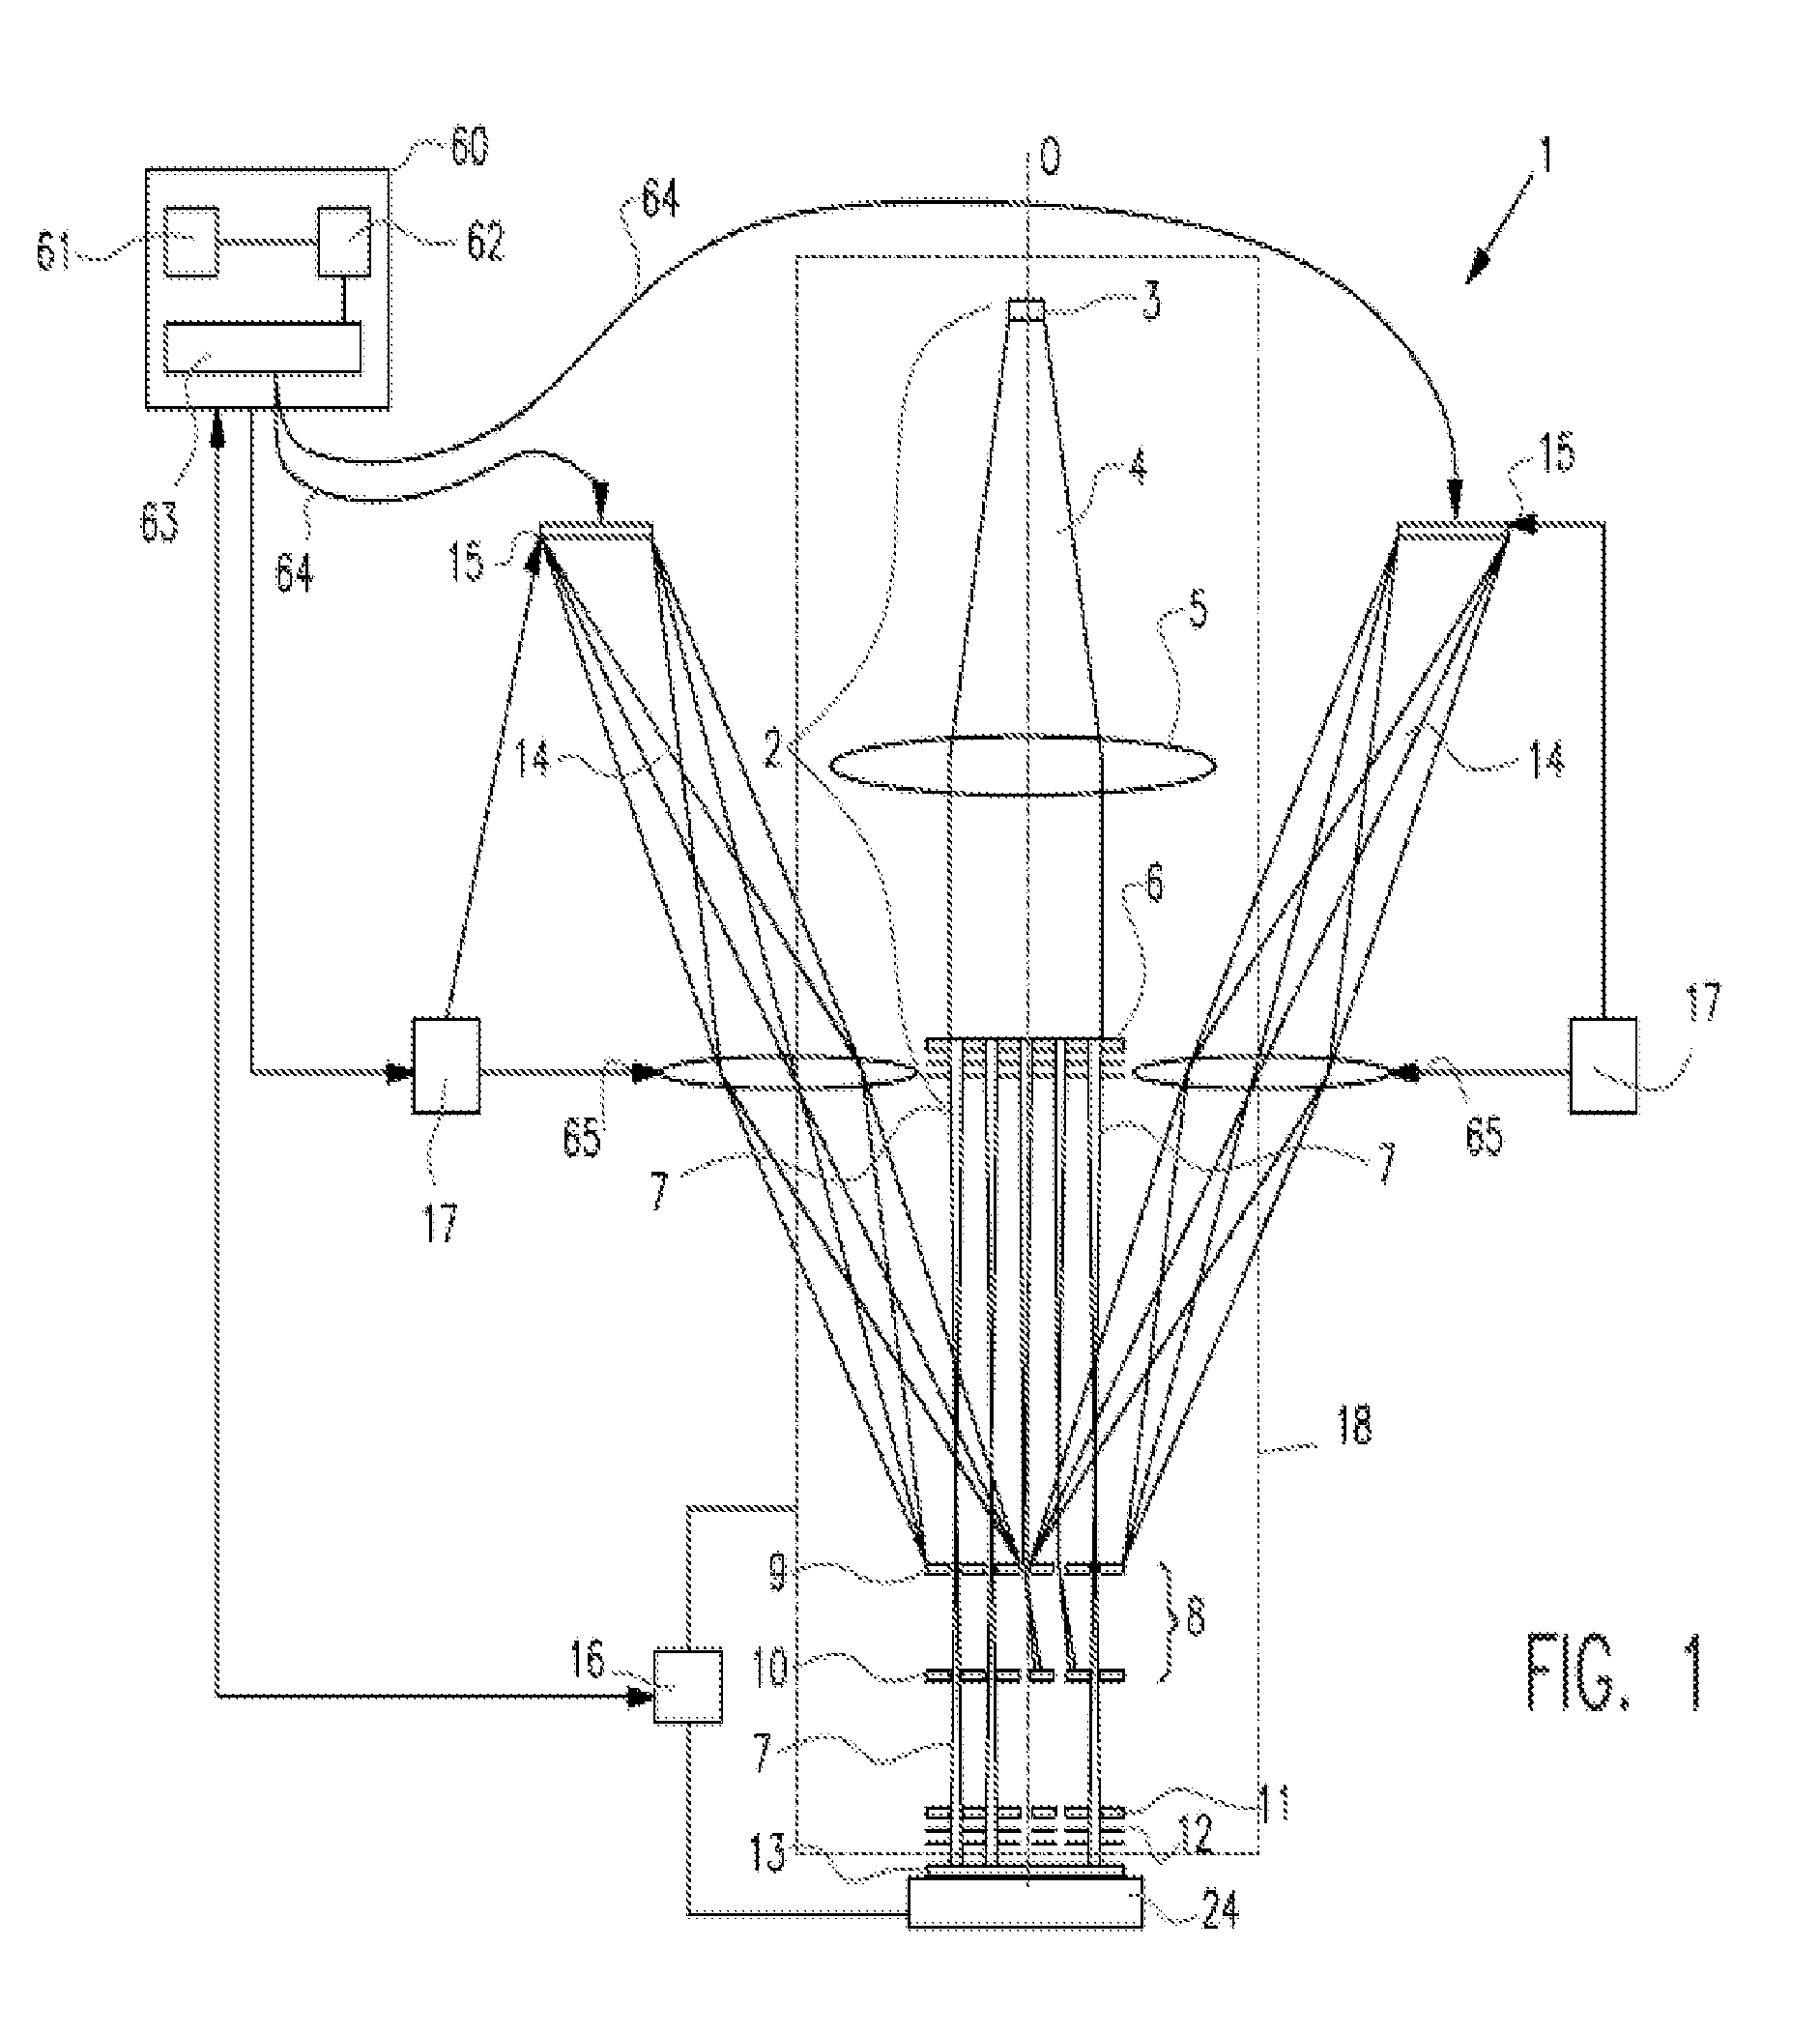 Charged particle optical system comprising an electrostatic deflector